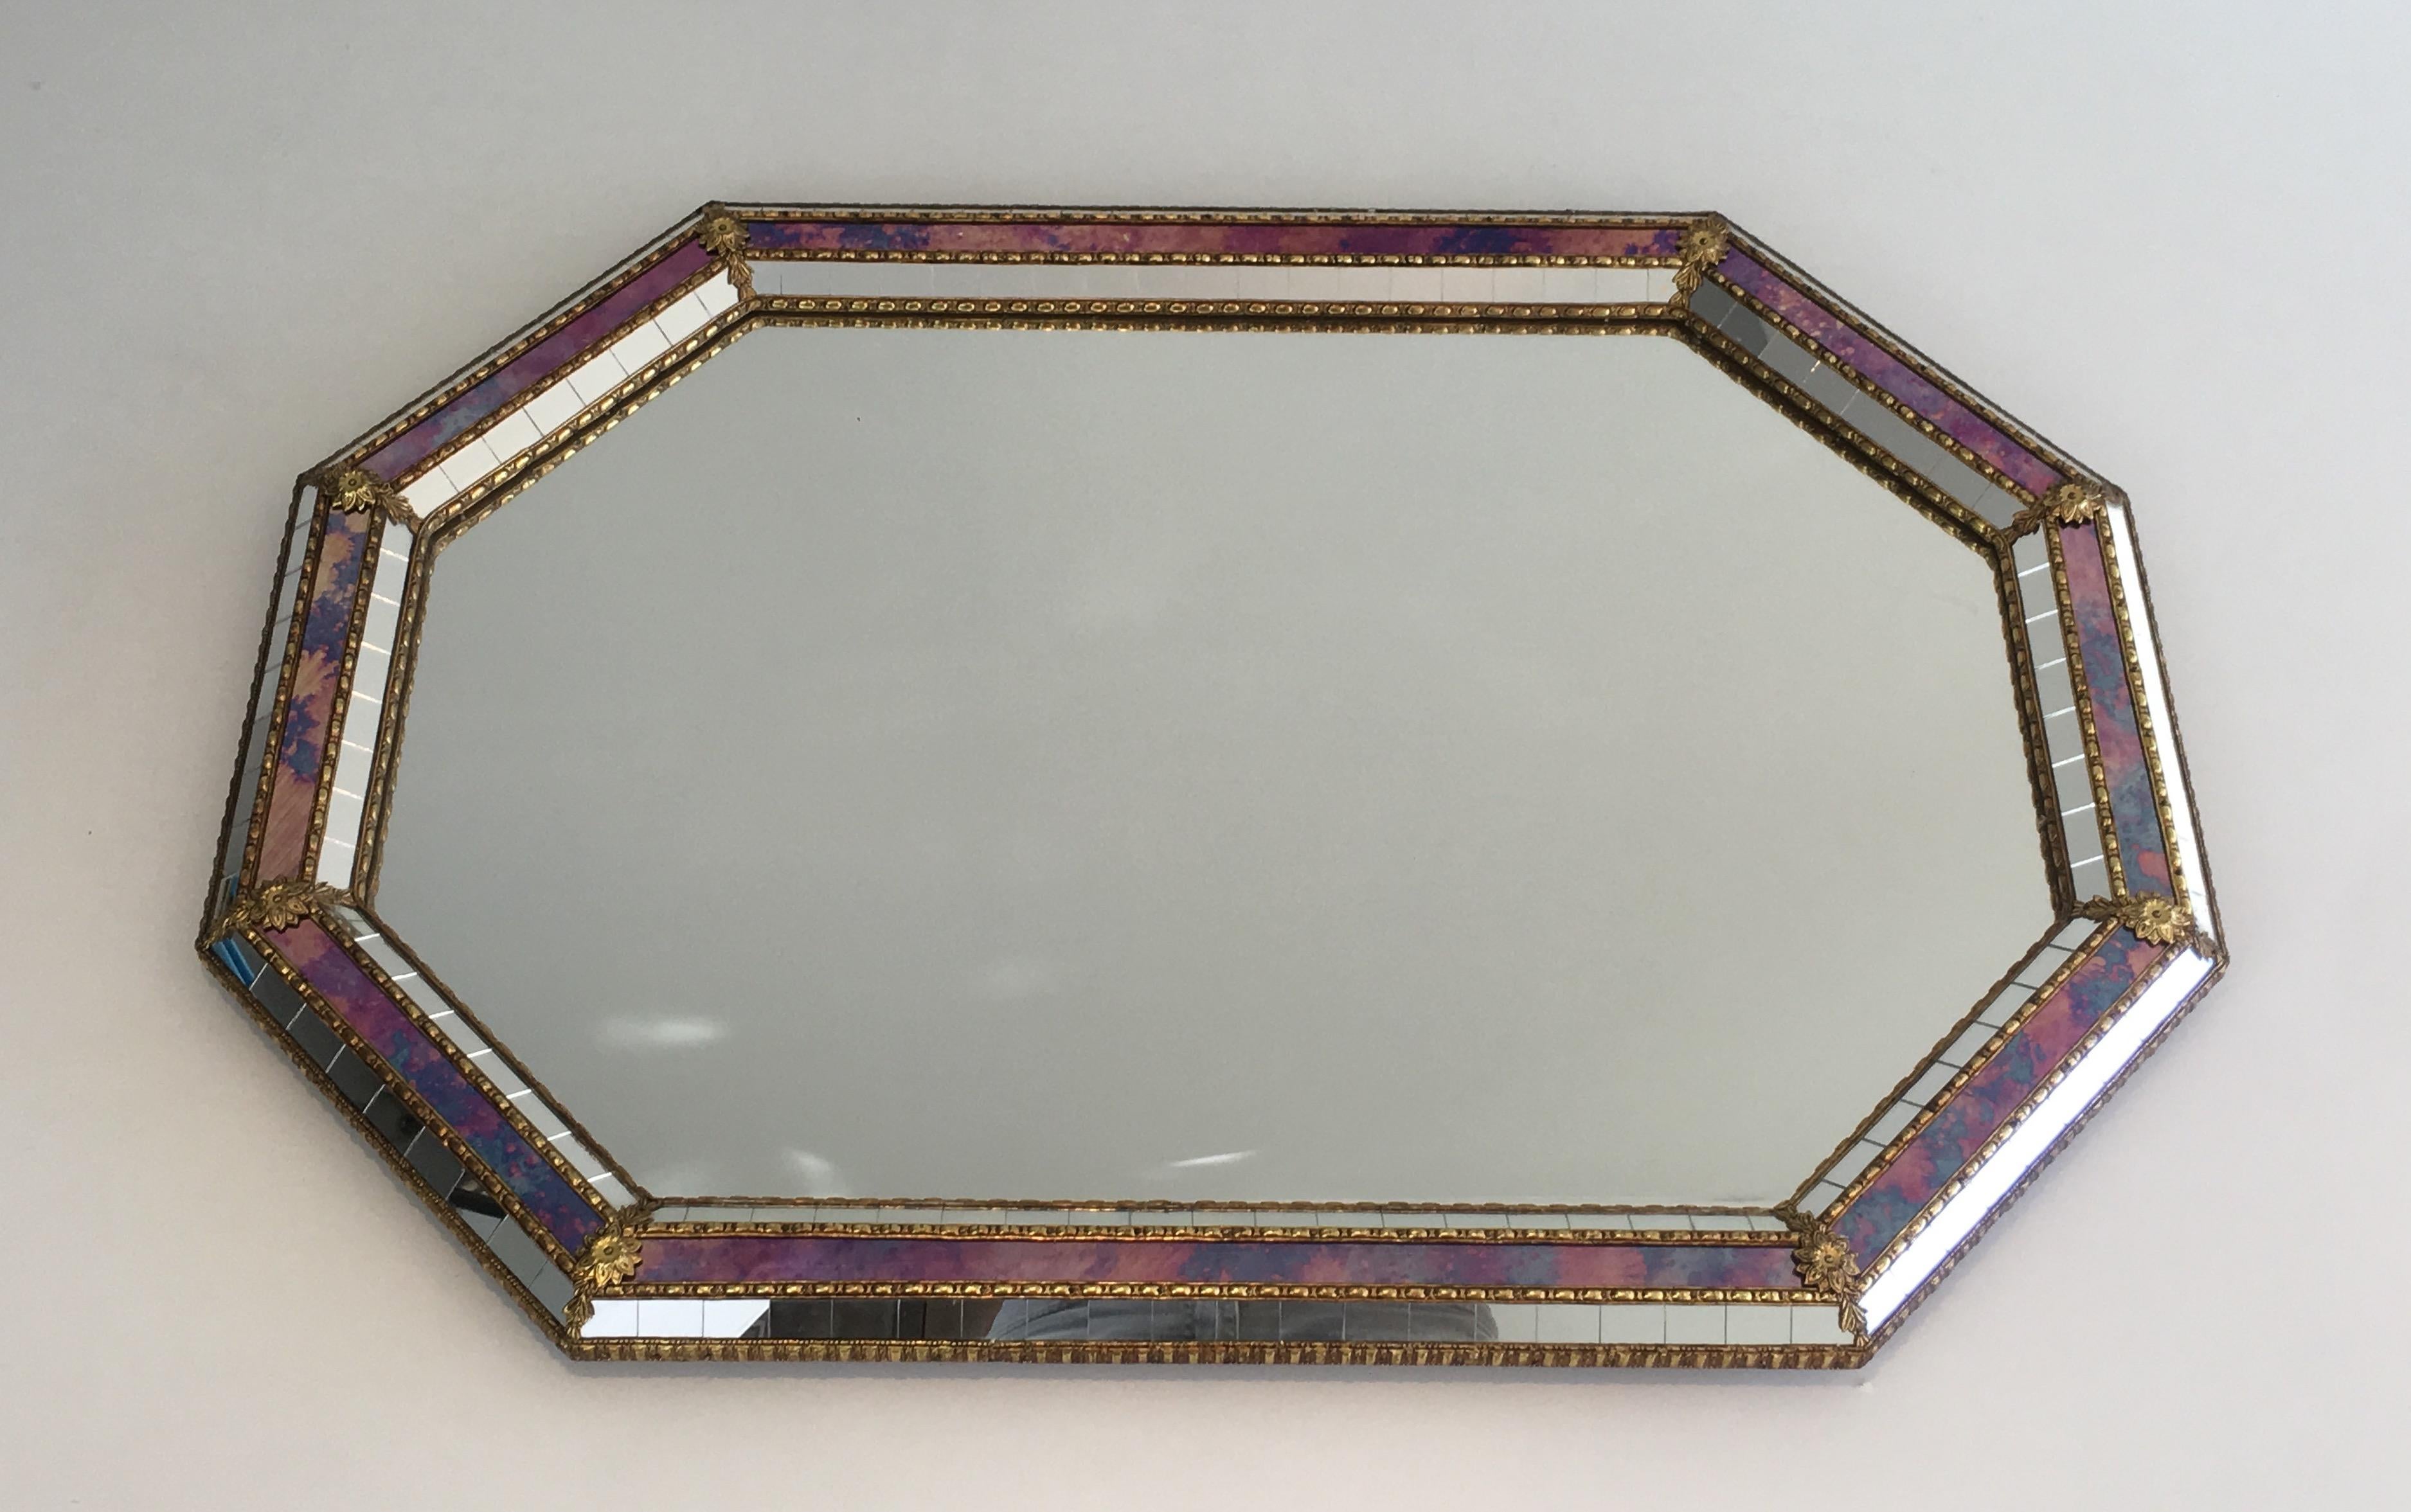 Octogonal Mirror made of Brass Garlands and Flowers and Mirror Faceted, French 15